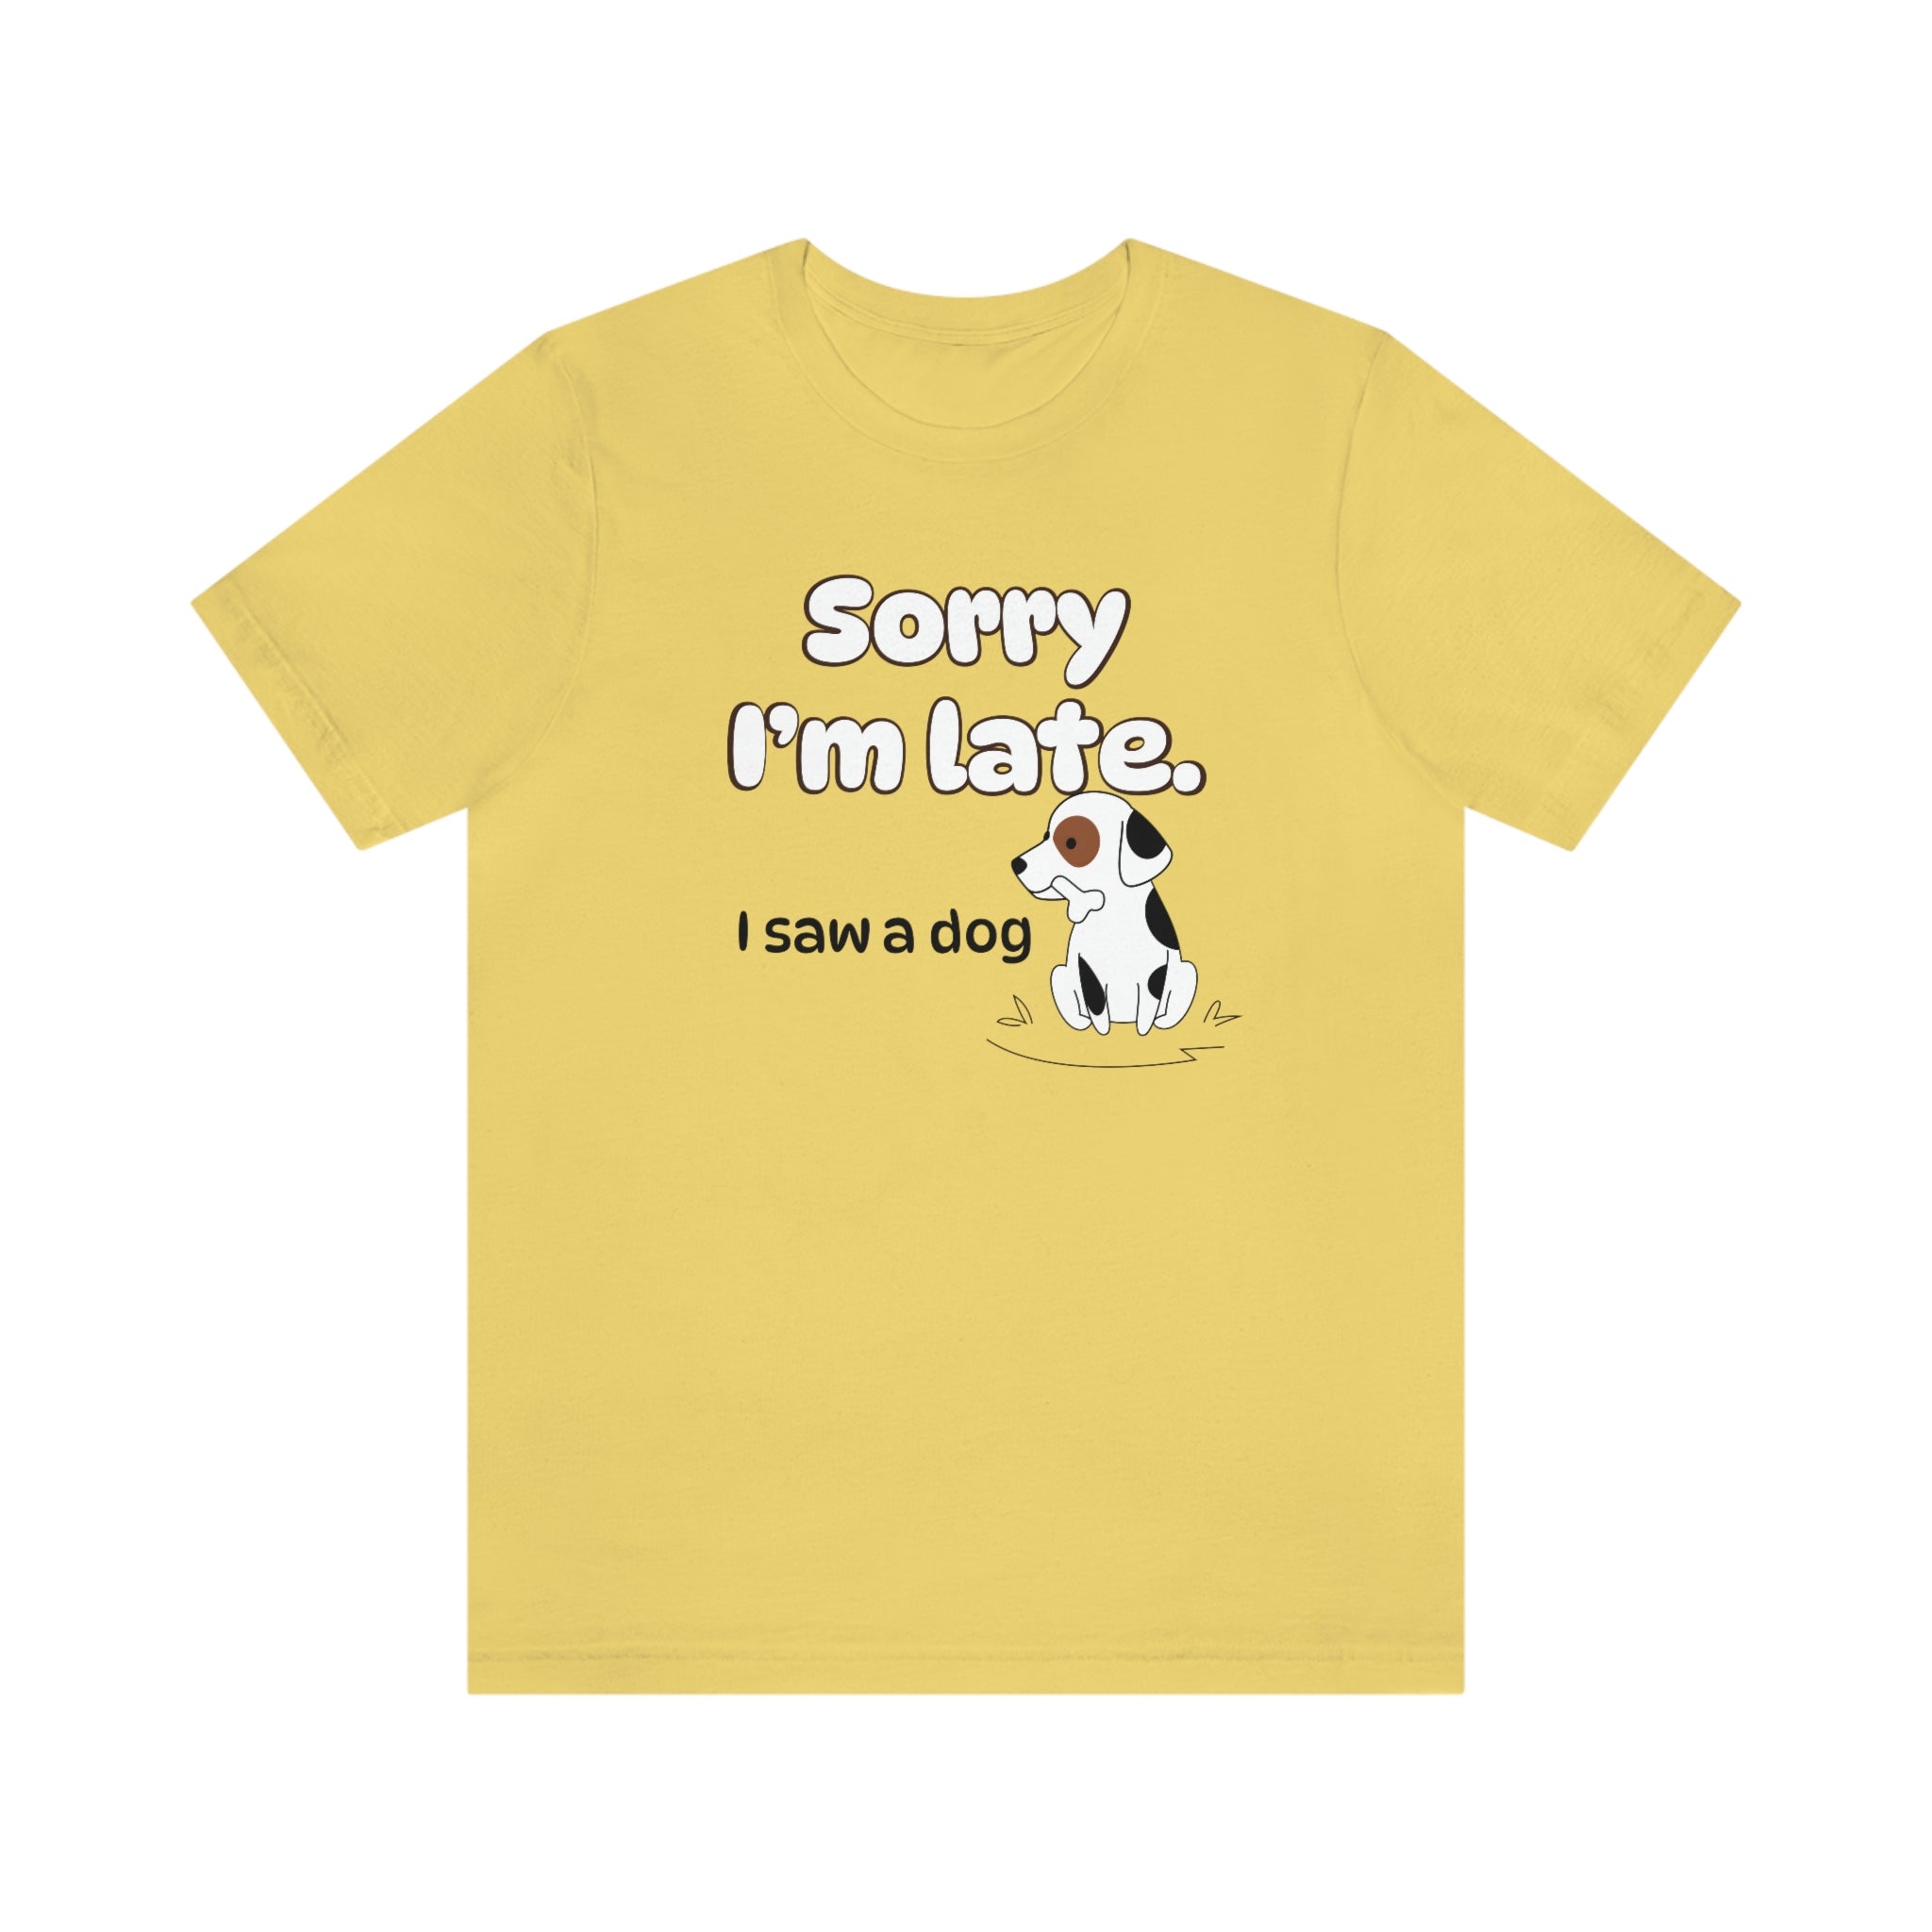 Sorry I'm late - I Saw a Dog : Unisex 100% Comfy Cotton T-Shirt by Bella+Canvas